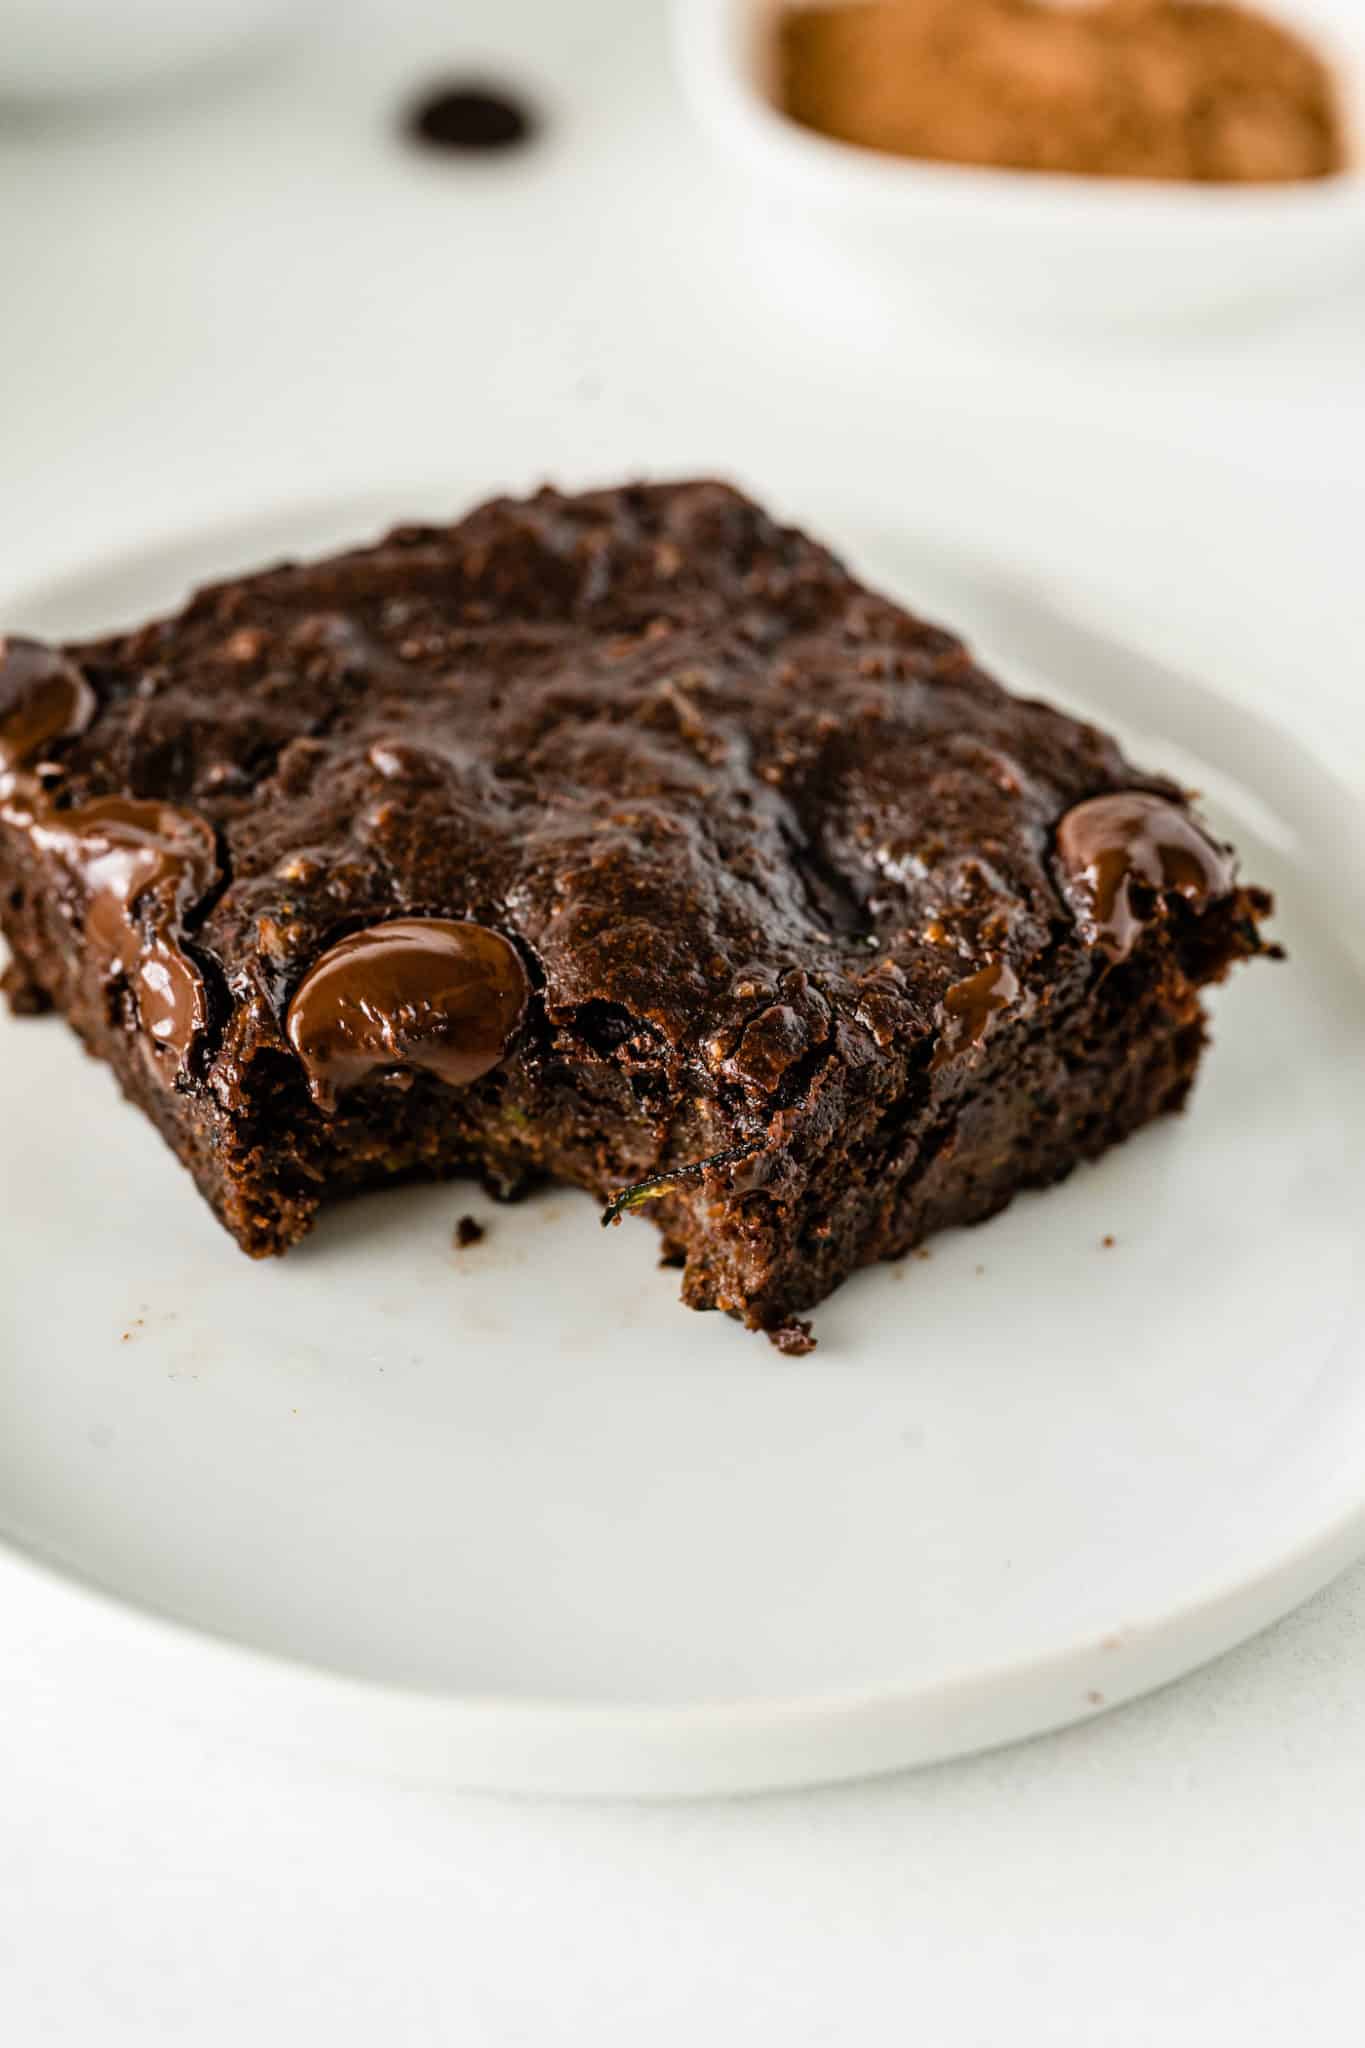 vegan zucchini brownie served on a plate.